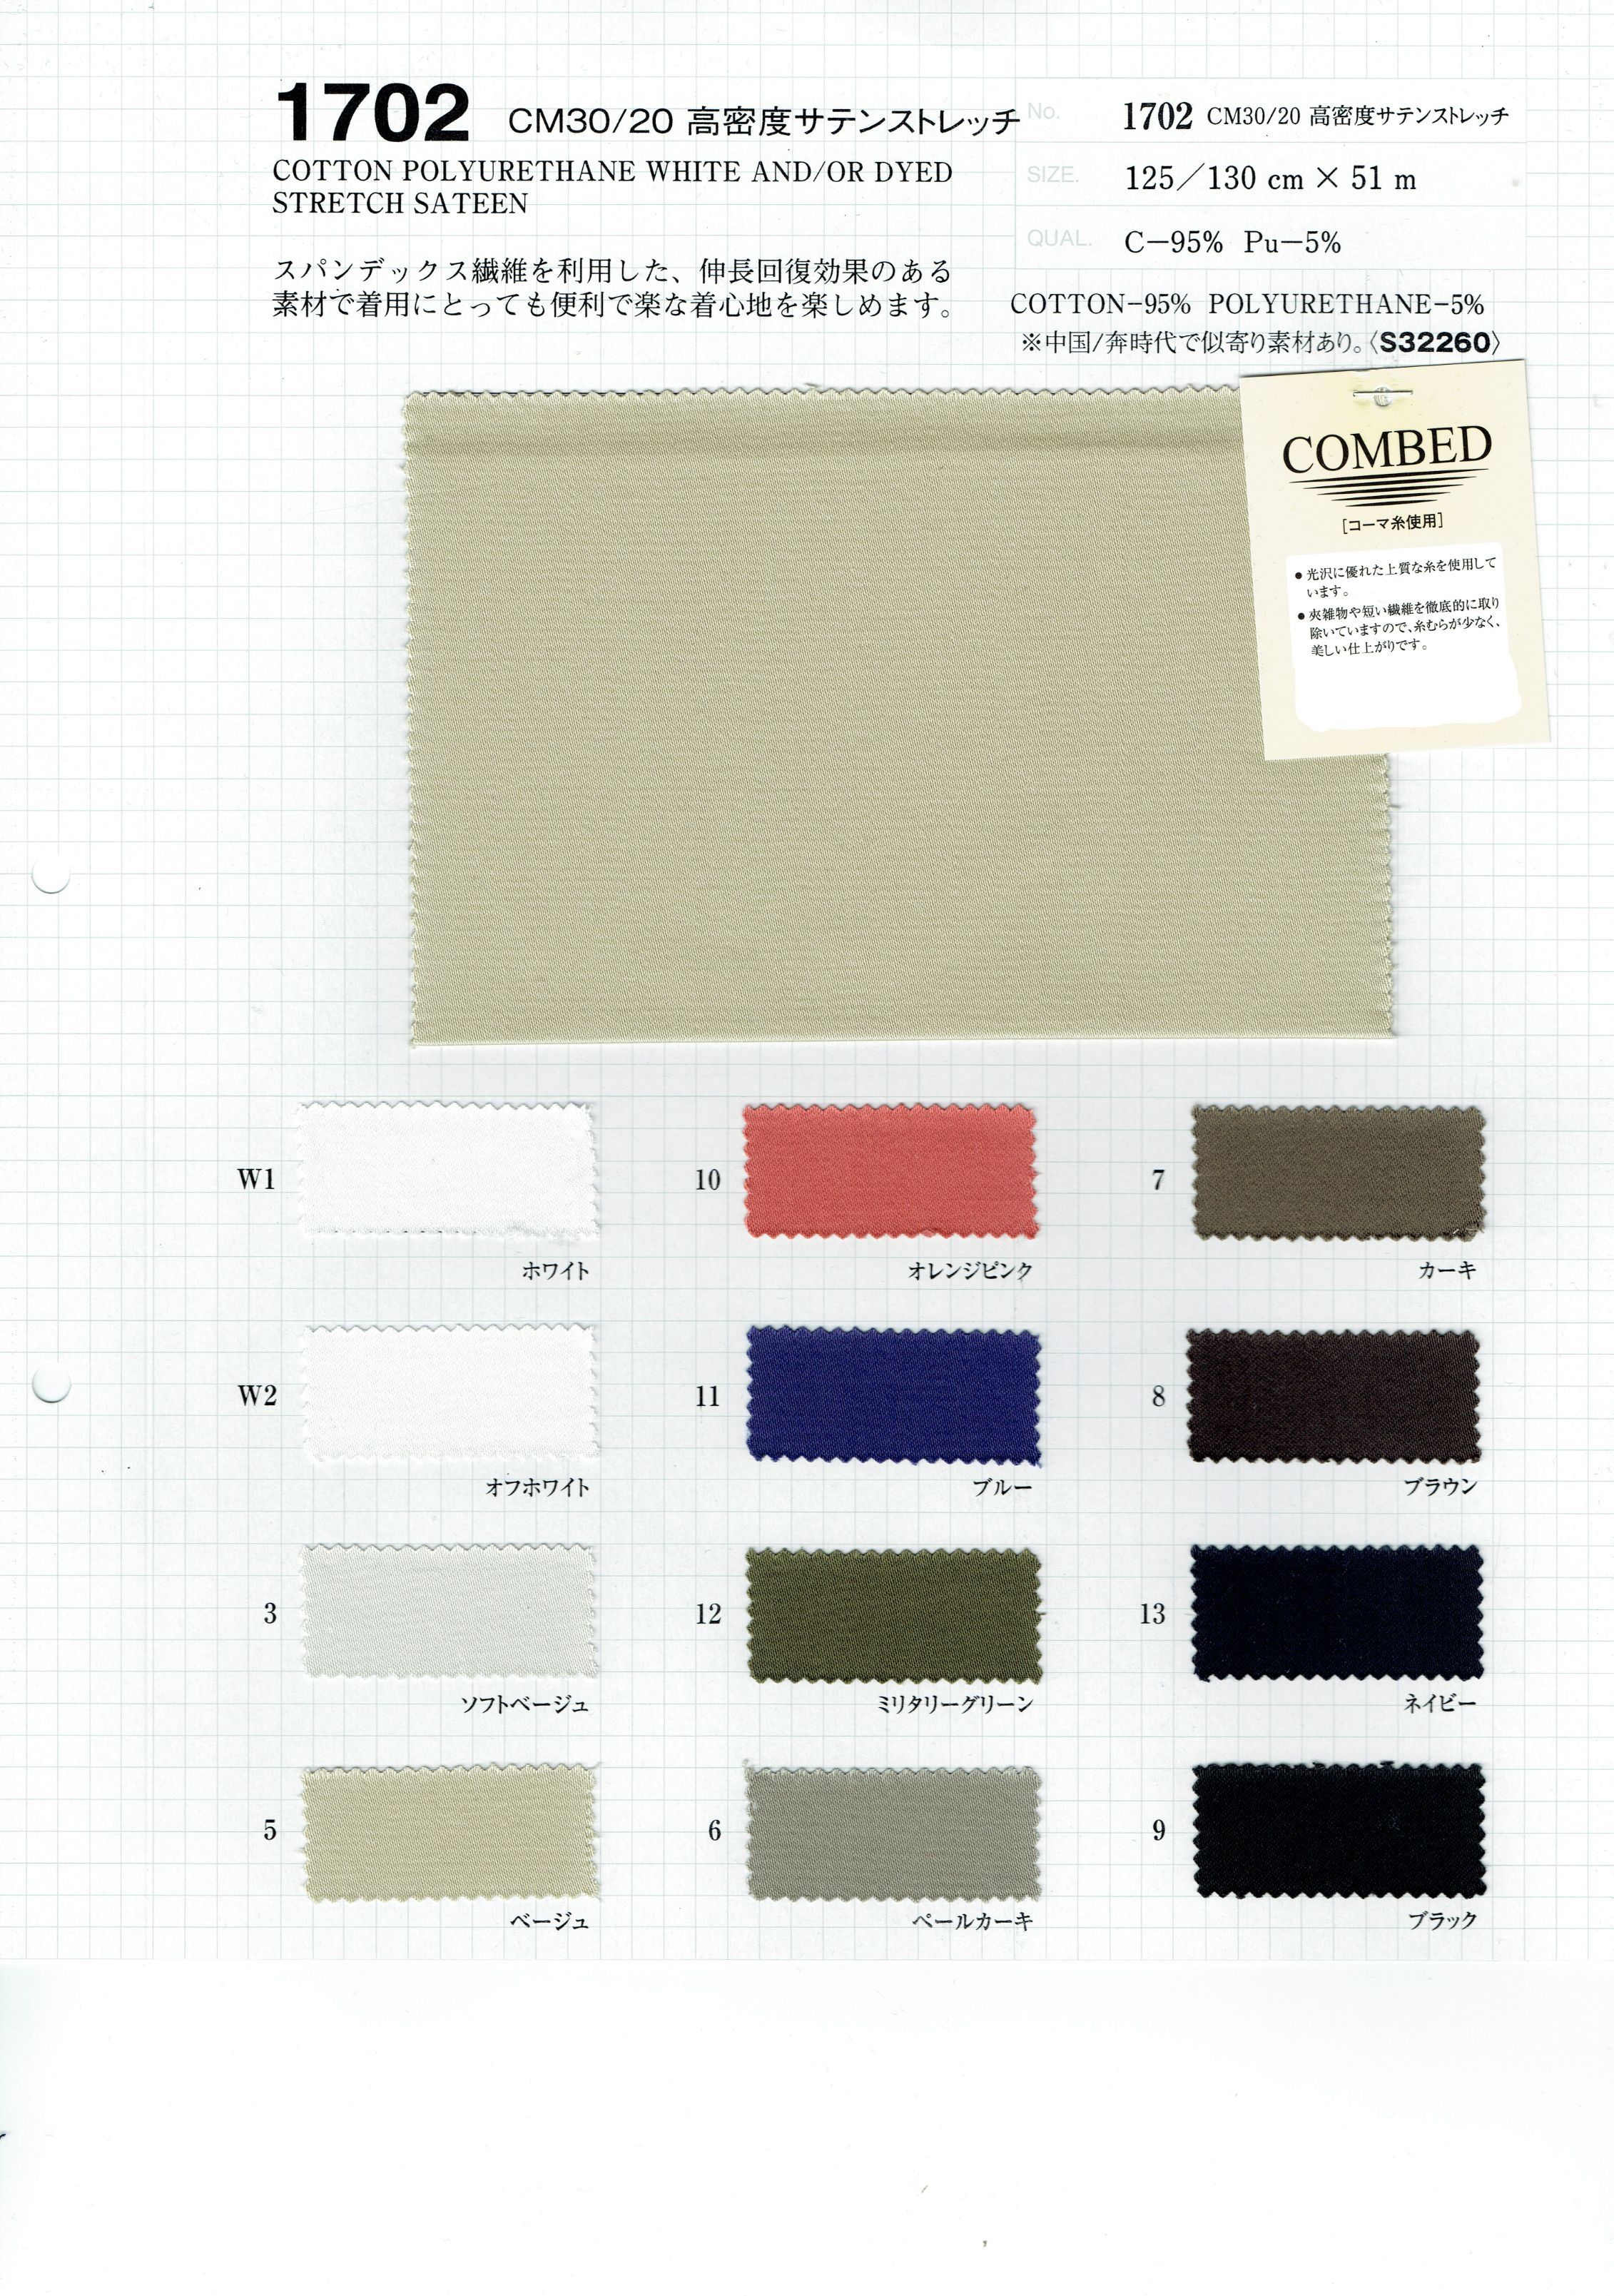 View 95% COTTON 5% POLYURETHANE WHITE AND/OR DYED STRETCH SATEEN